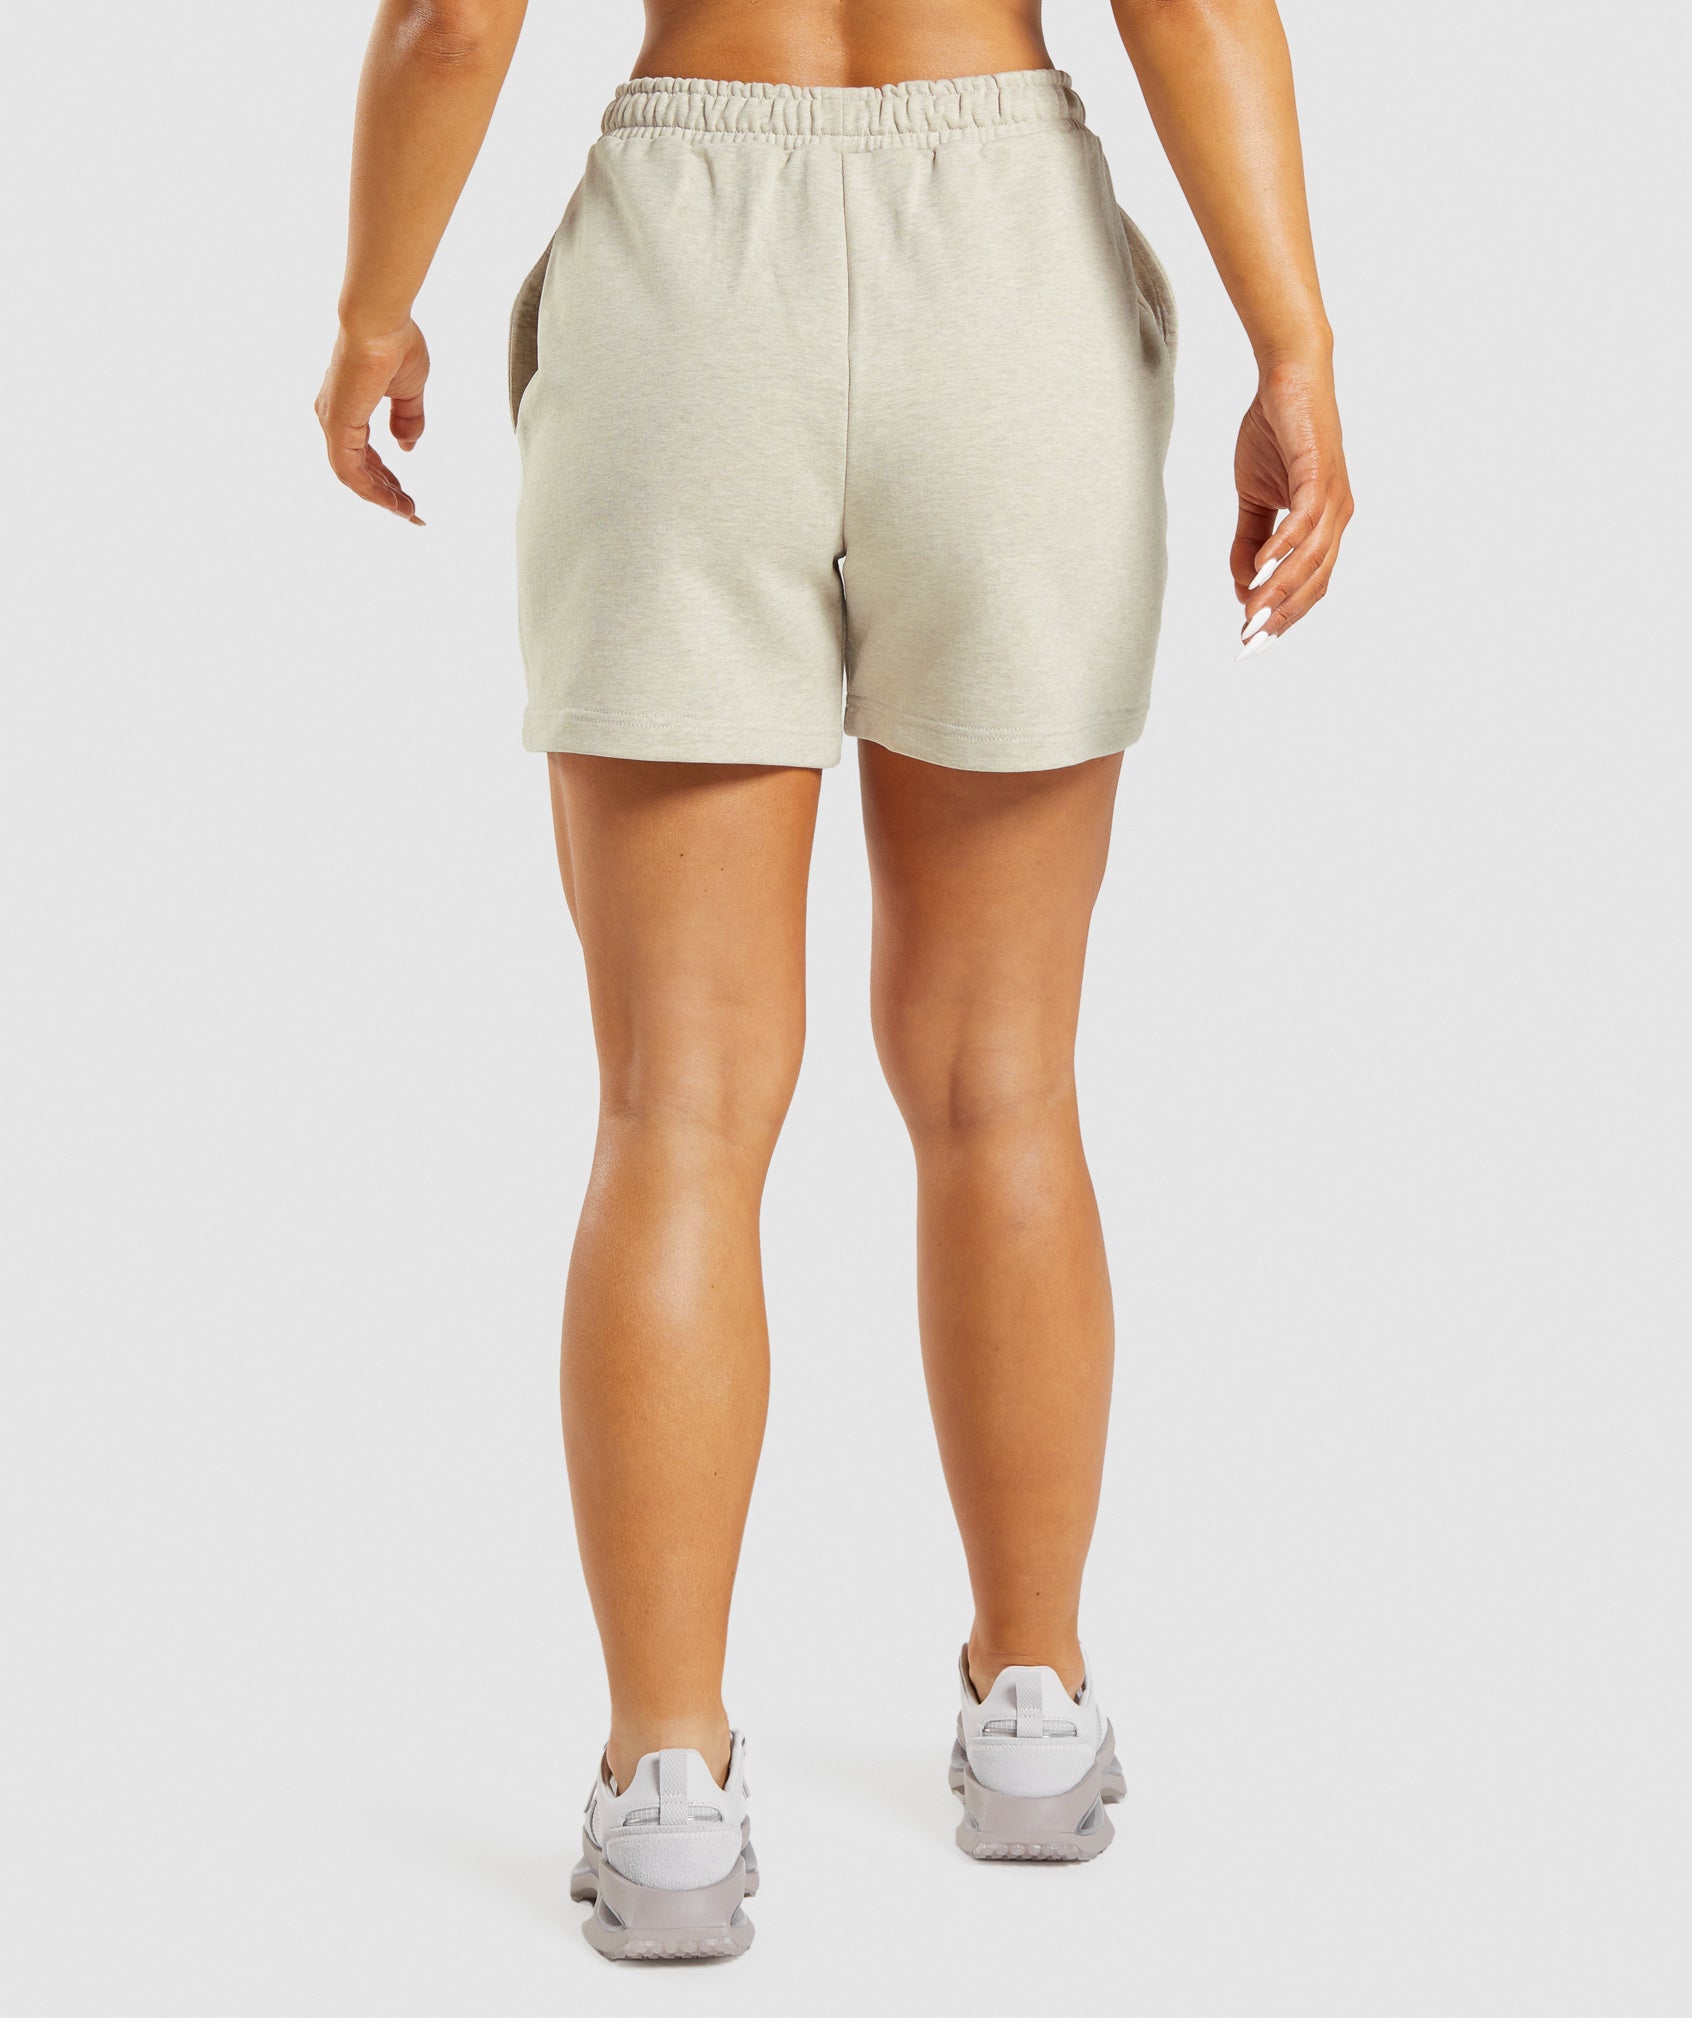 Rest Day Sweats Shorts in Sand Marl - view 3